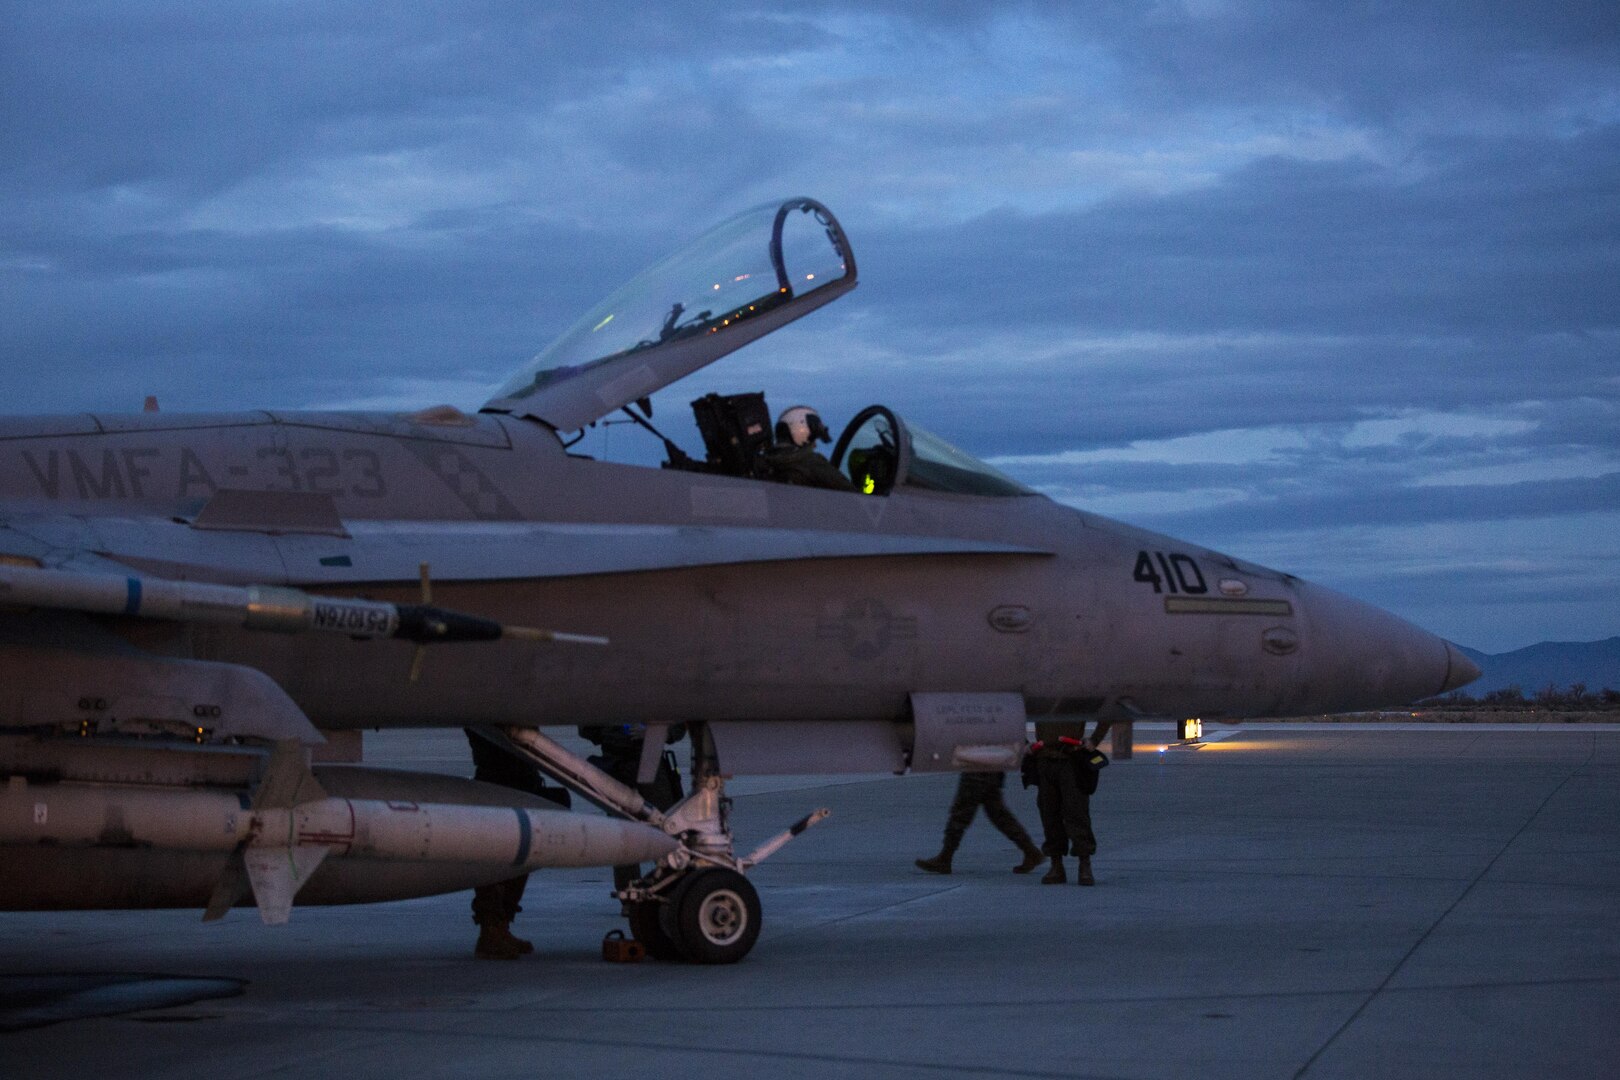 The pilot of an F/A-18C Hornet with Marine Fighter Attack Squadron (VMFA) 323 “Death Rattlers” inspects the aircraft’s functions prior to beginning night operations at Naval Air Station Fallon, Nev., Feb. 15. The Death Rattlers, one of two Marine Hornet squadrons to deploy aboard Navy aircraft carriers, trained at NAS Fallon to strengthen tactical air integration, fulfill predeployment requirements and build rapport with the Navy squadrons they will deploy with in summer 2017. (U.S. Marine Corps photo by Sgt. Lillian Stephens/Released)